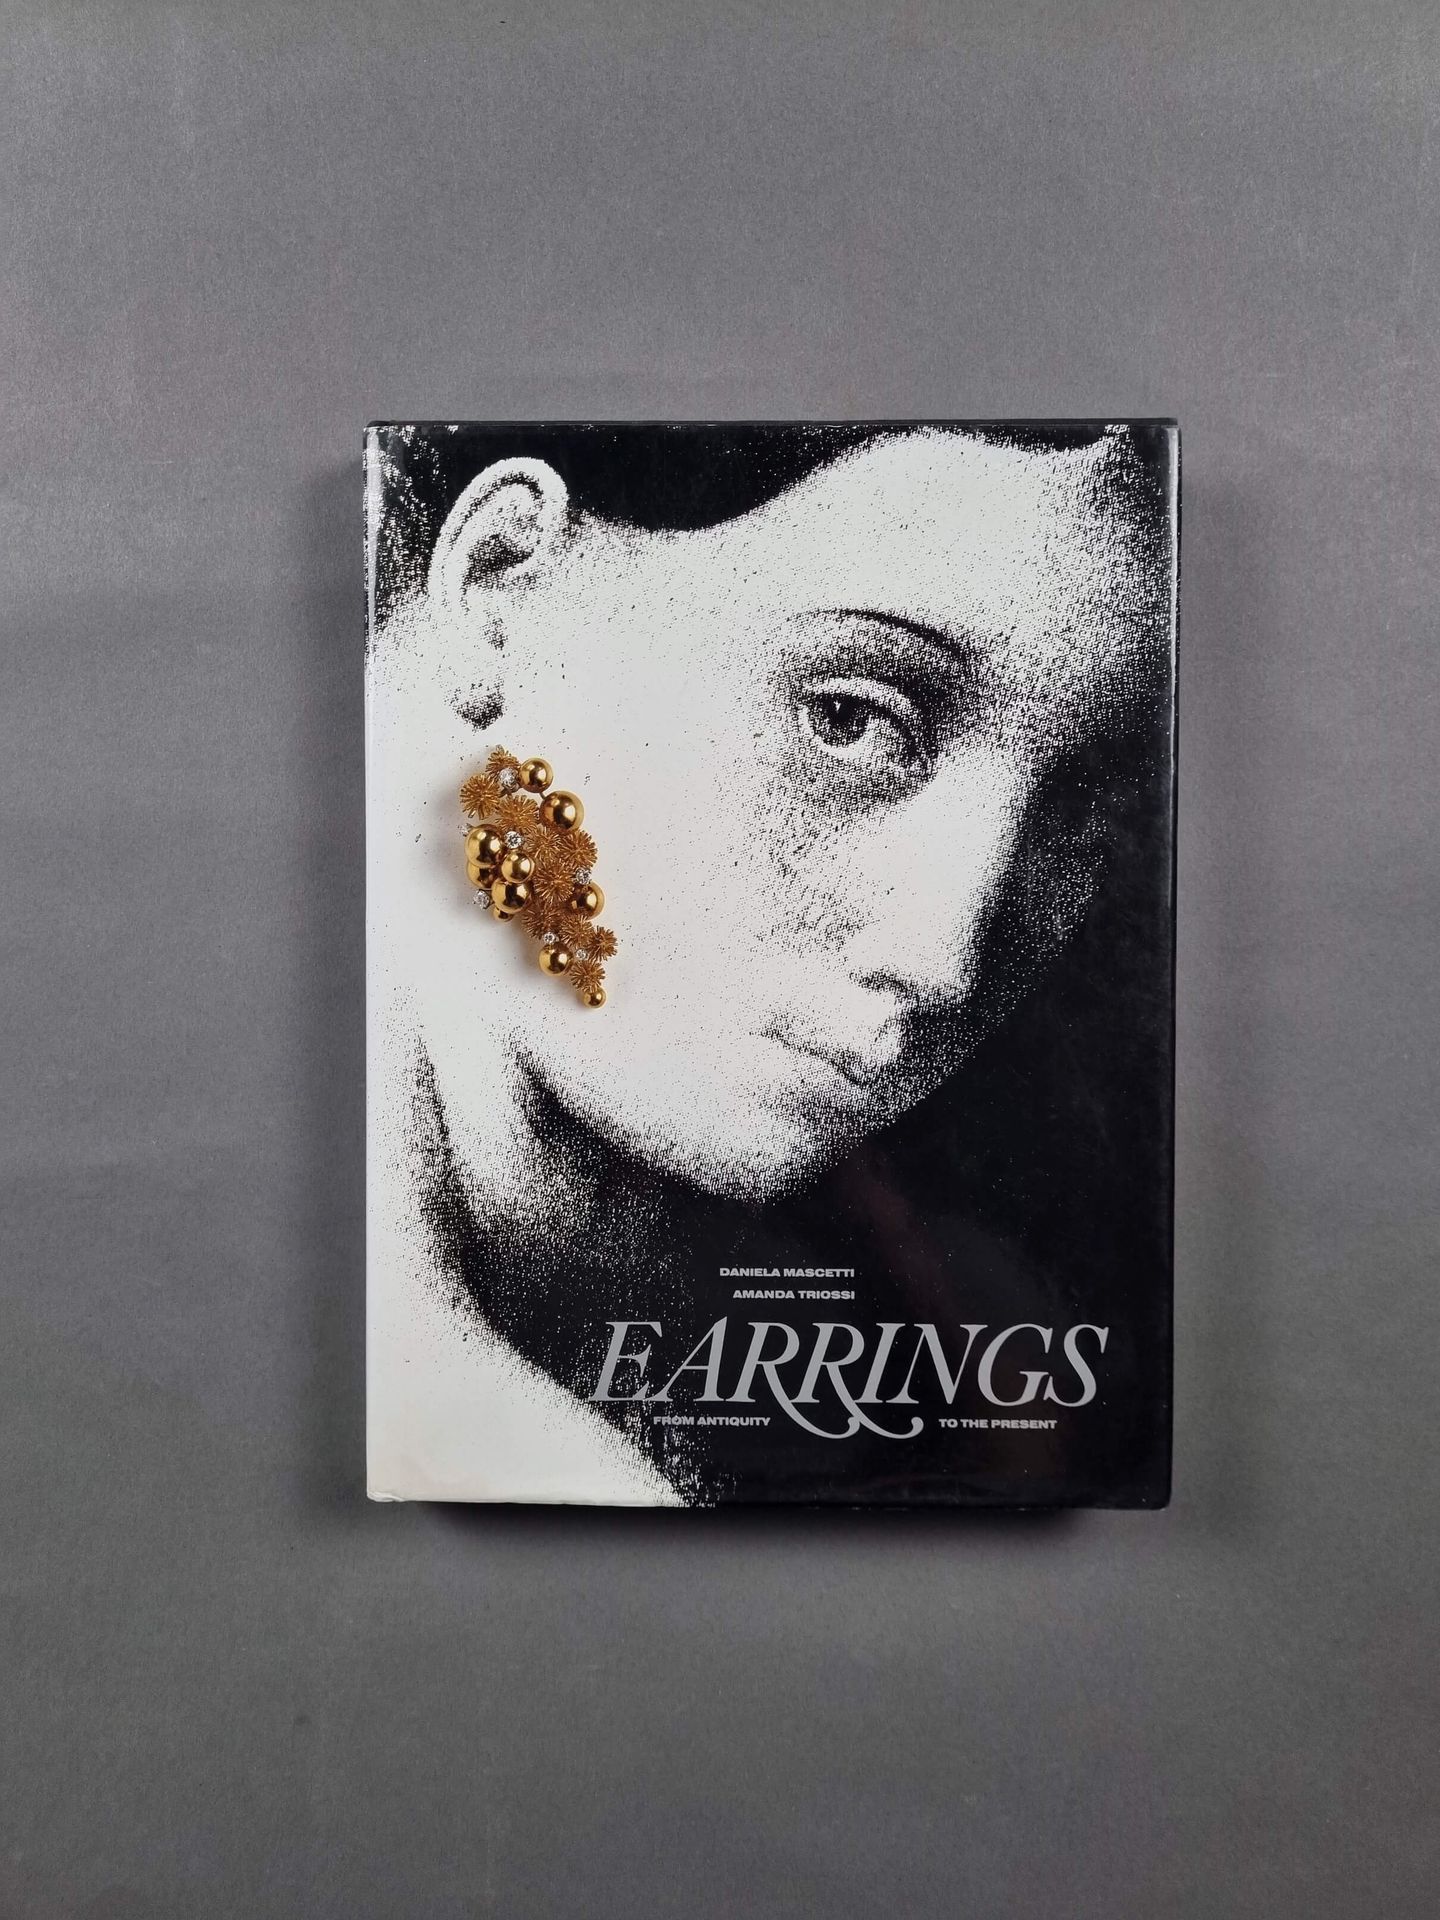 MASCETTI (Daniela) et al. : Earrings from antiquity to the present. Thames and H&hellip;